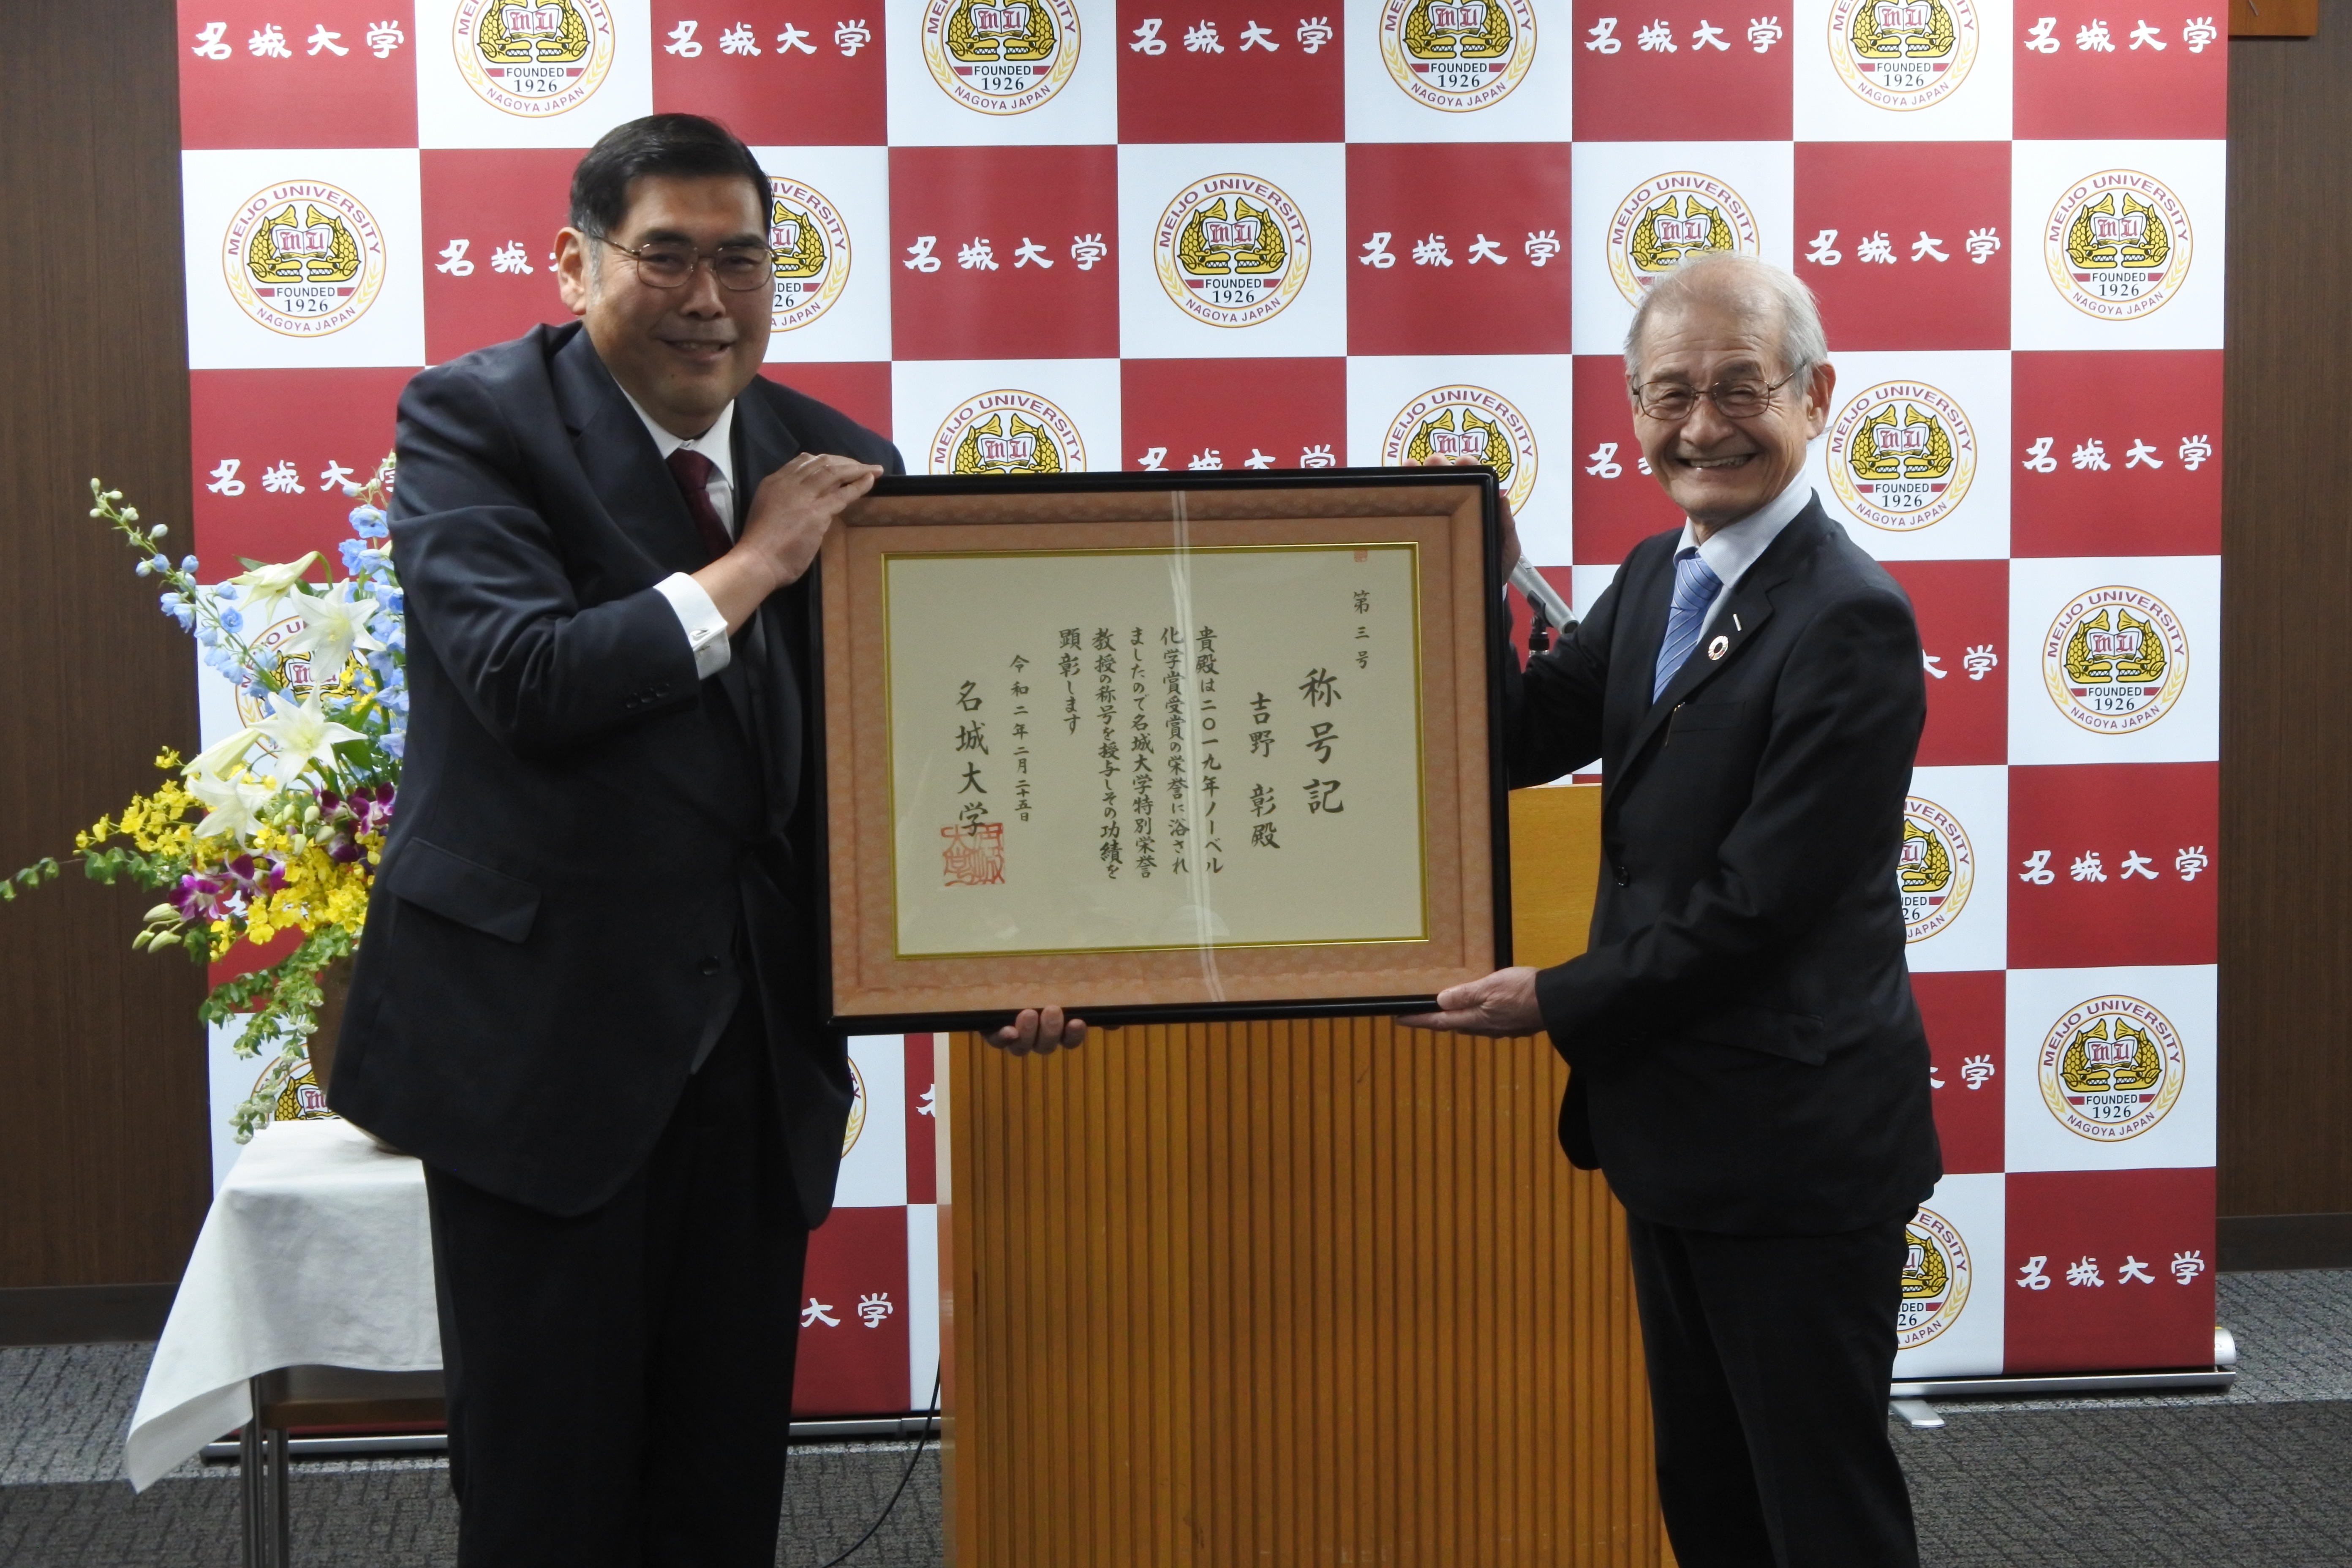 Dr. YOSHINO smiling with his certificate